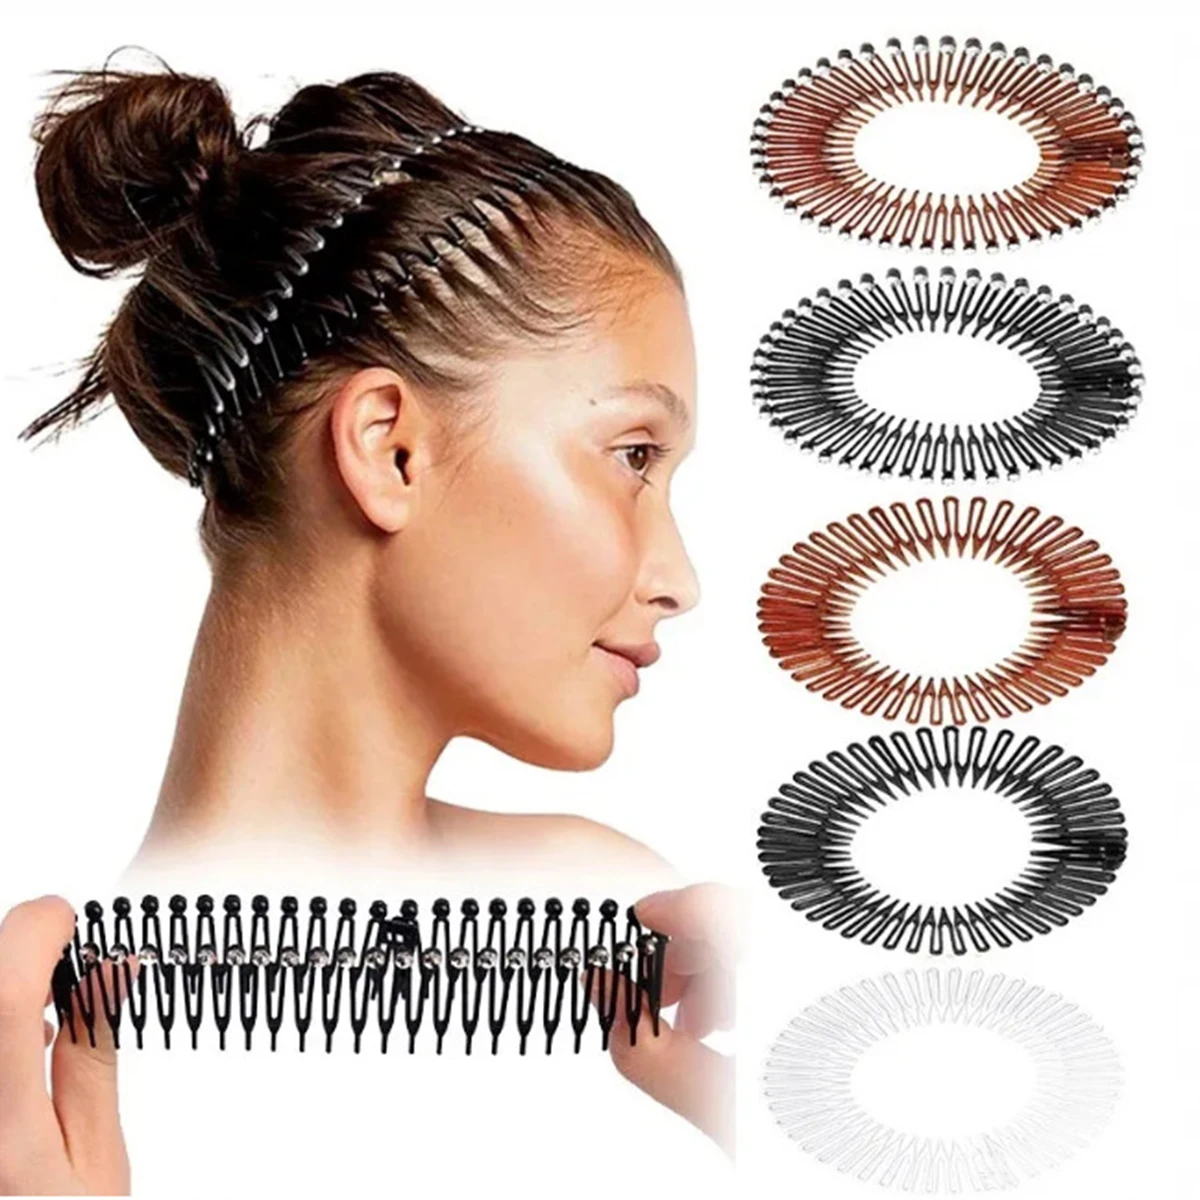 Good Quality 32cm Plastic Circular Wig Combs For Wig Caps Wig Clips For Hair Extensions Strong Black Lace Hair Comb enchen hummingbird electric hair clipper usb rechargeable low noise with 3 hair combs 1500mah lithium battery from xiaomi youpin black